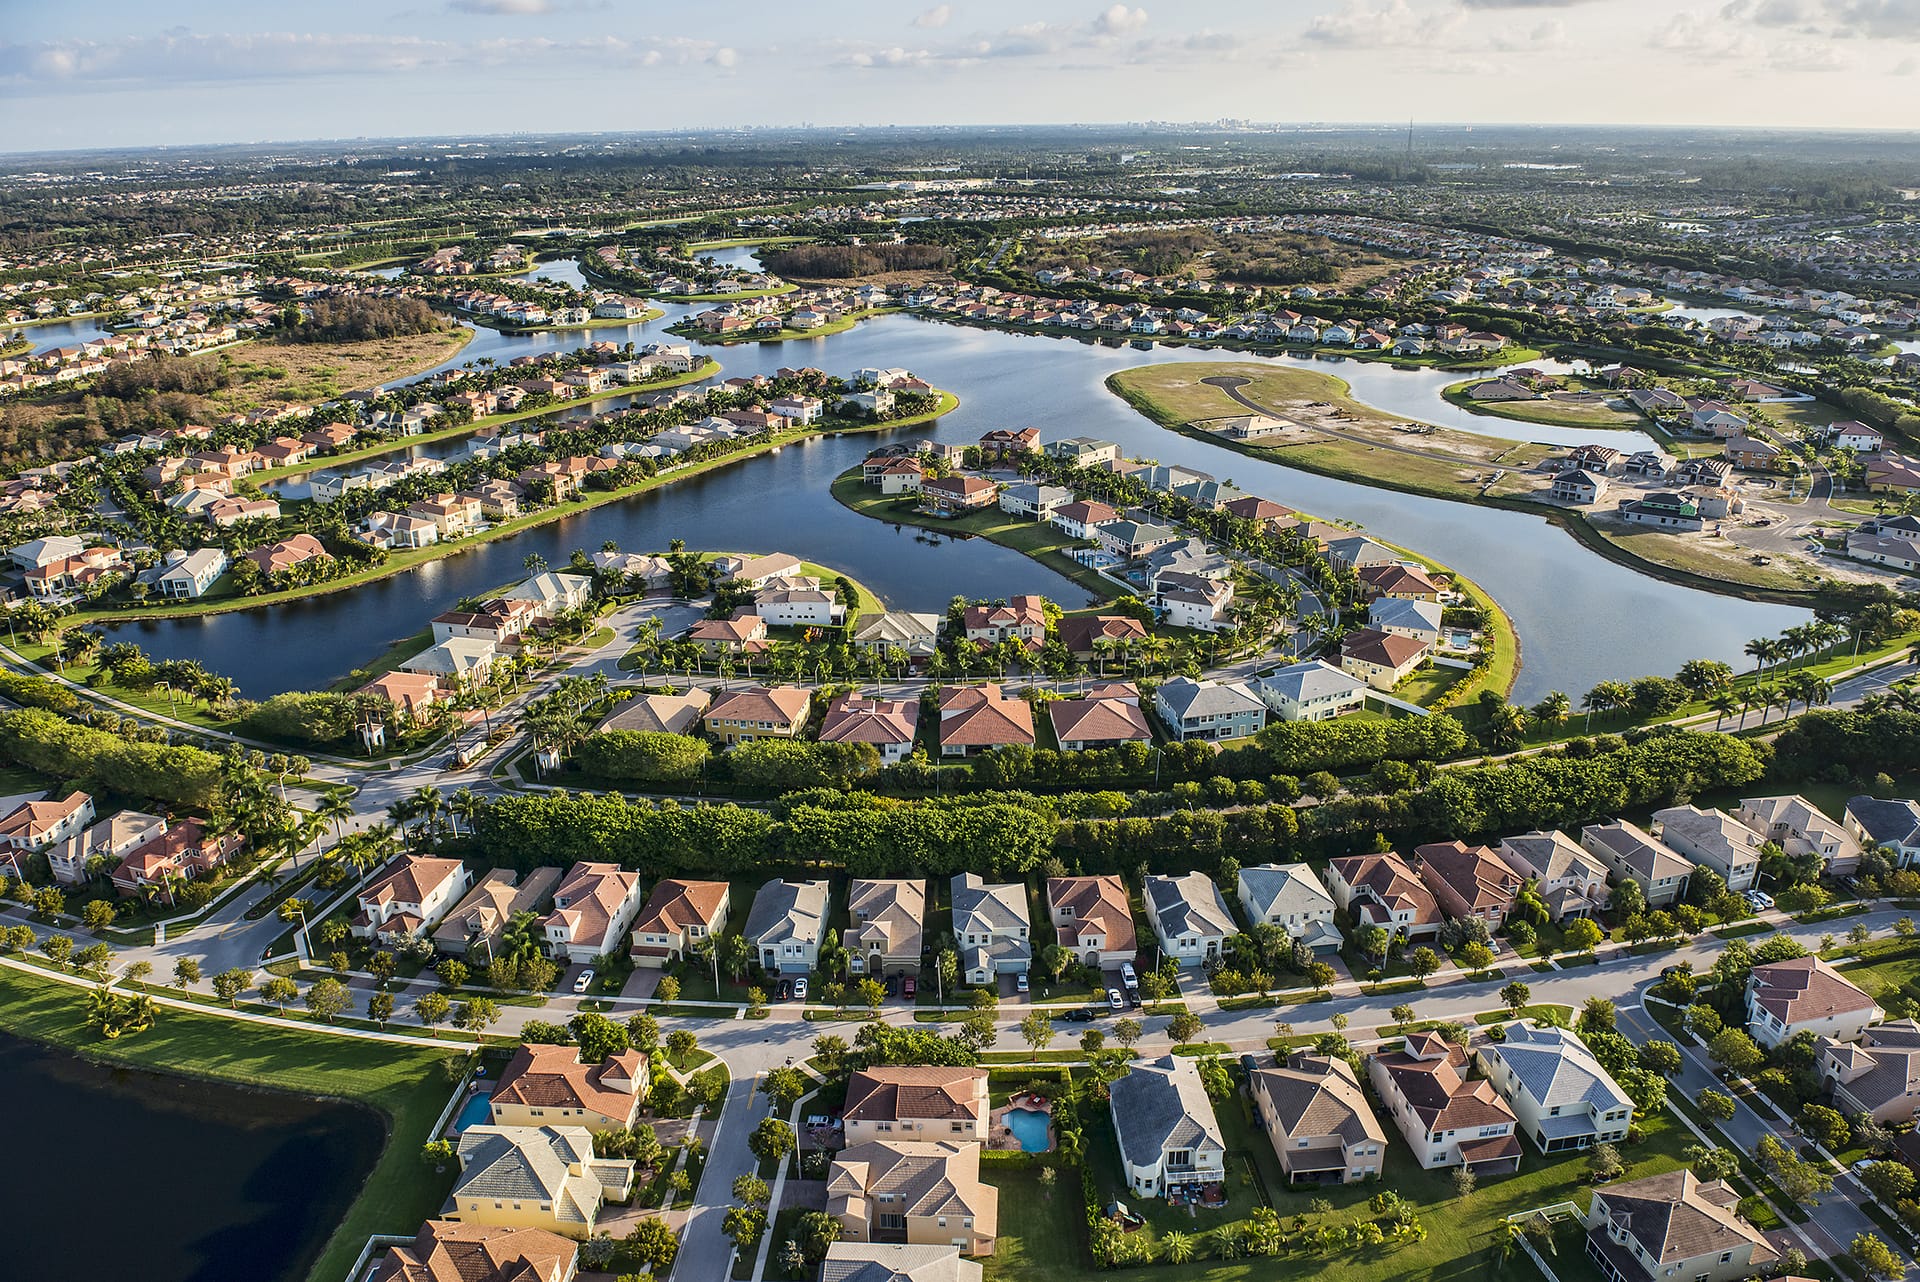 Aerial view of a South Florida suburban housing community